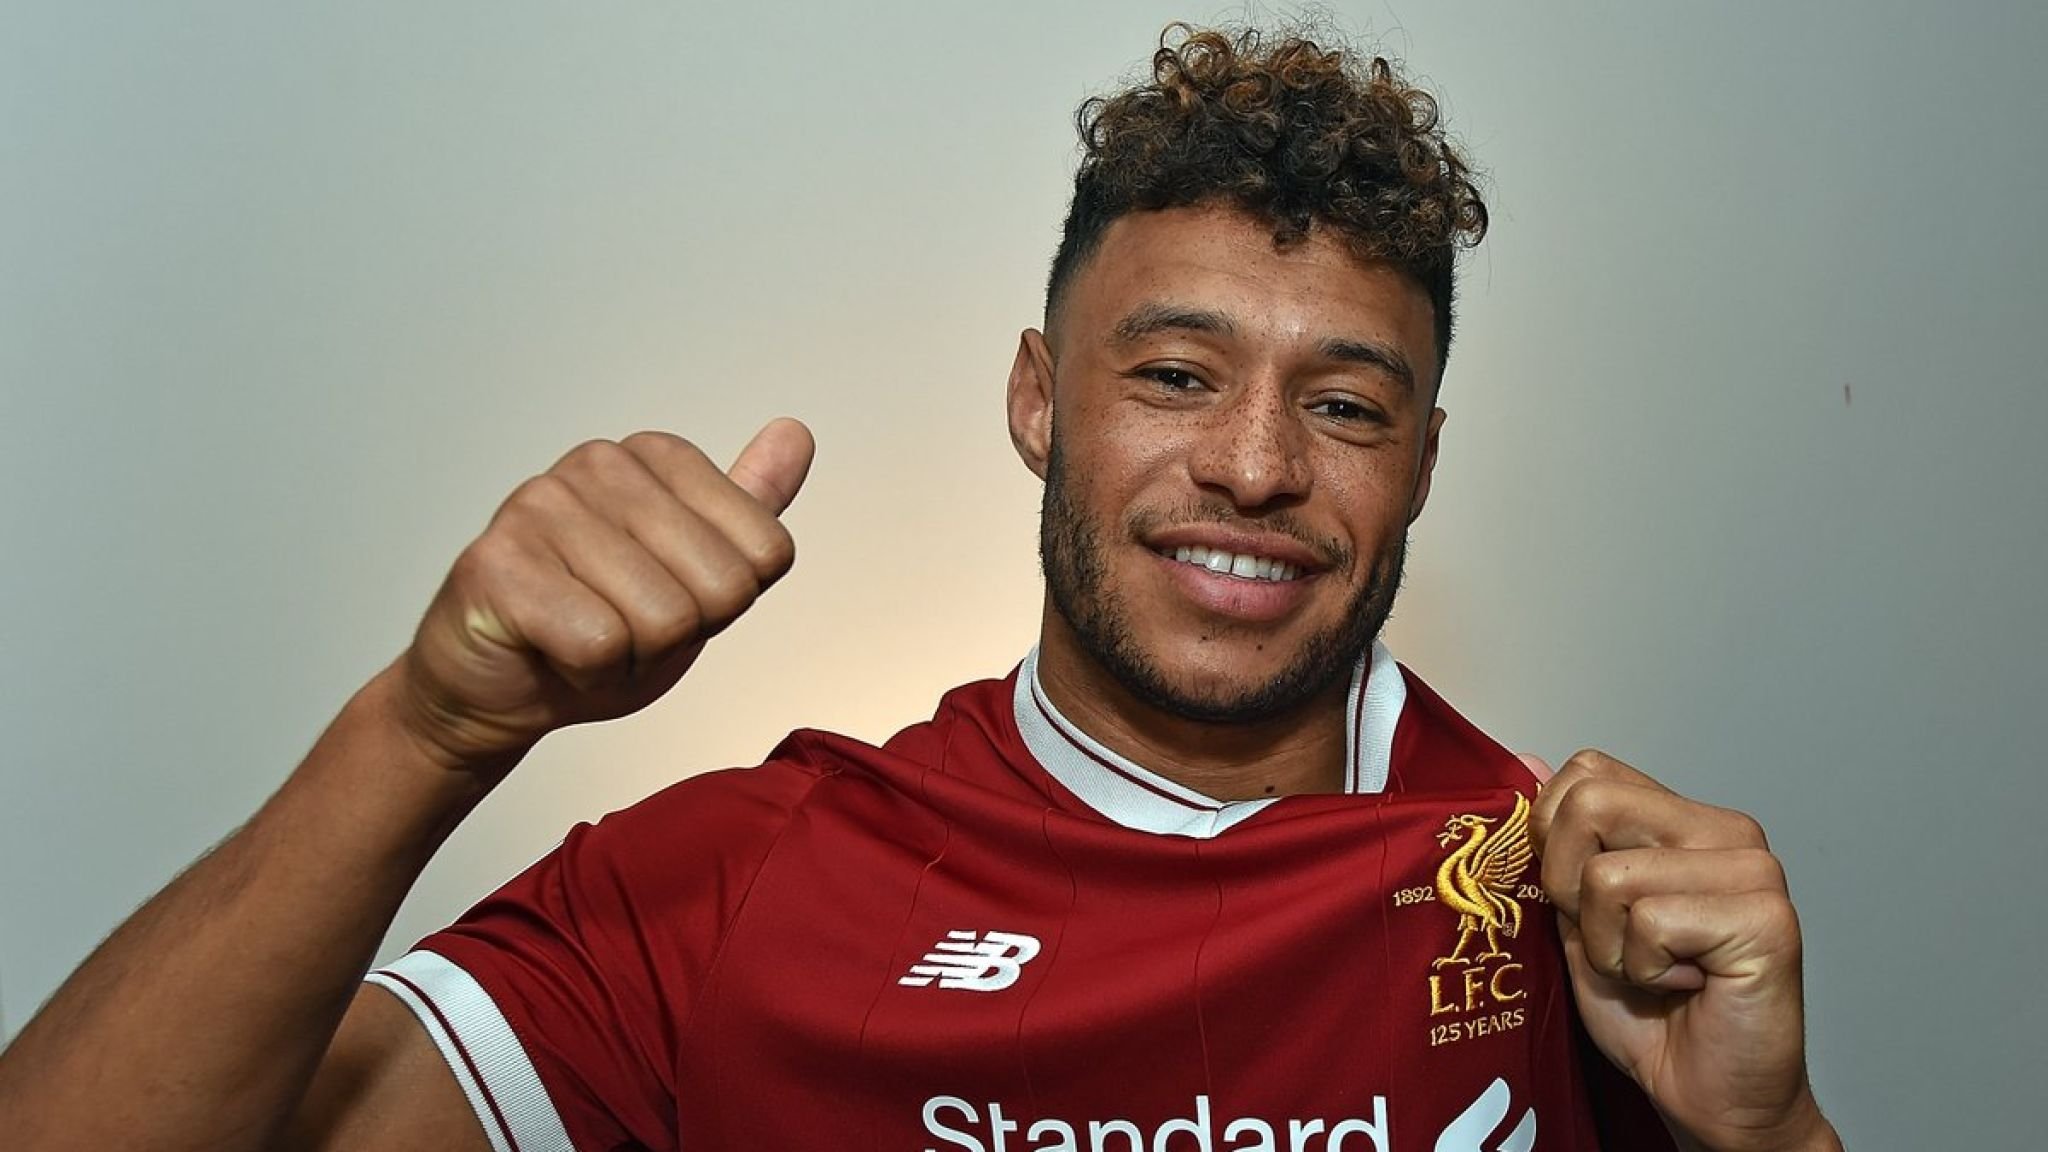 Chamberlain and other footballers joining rivals